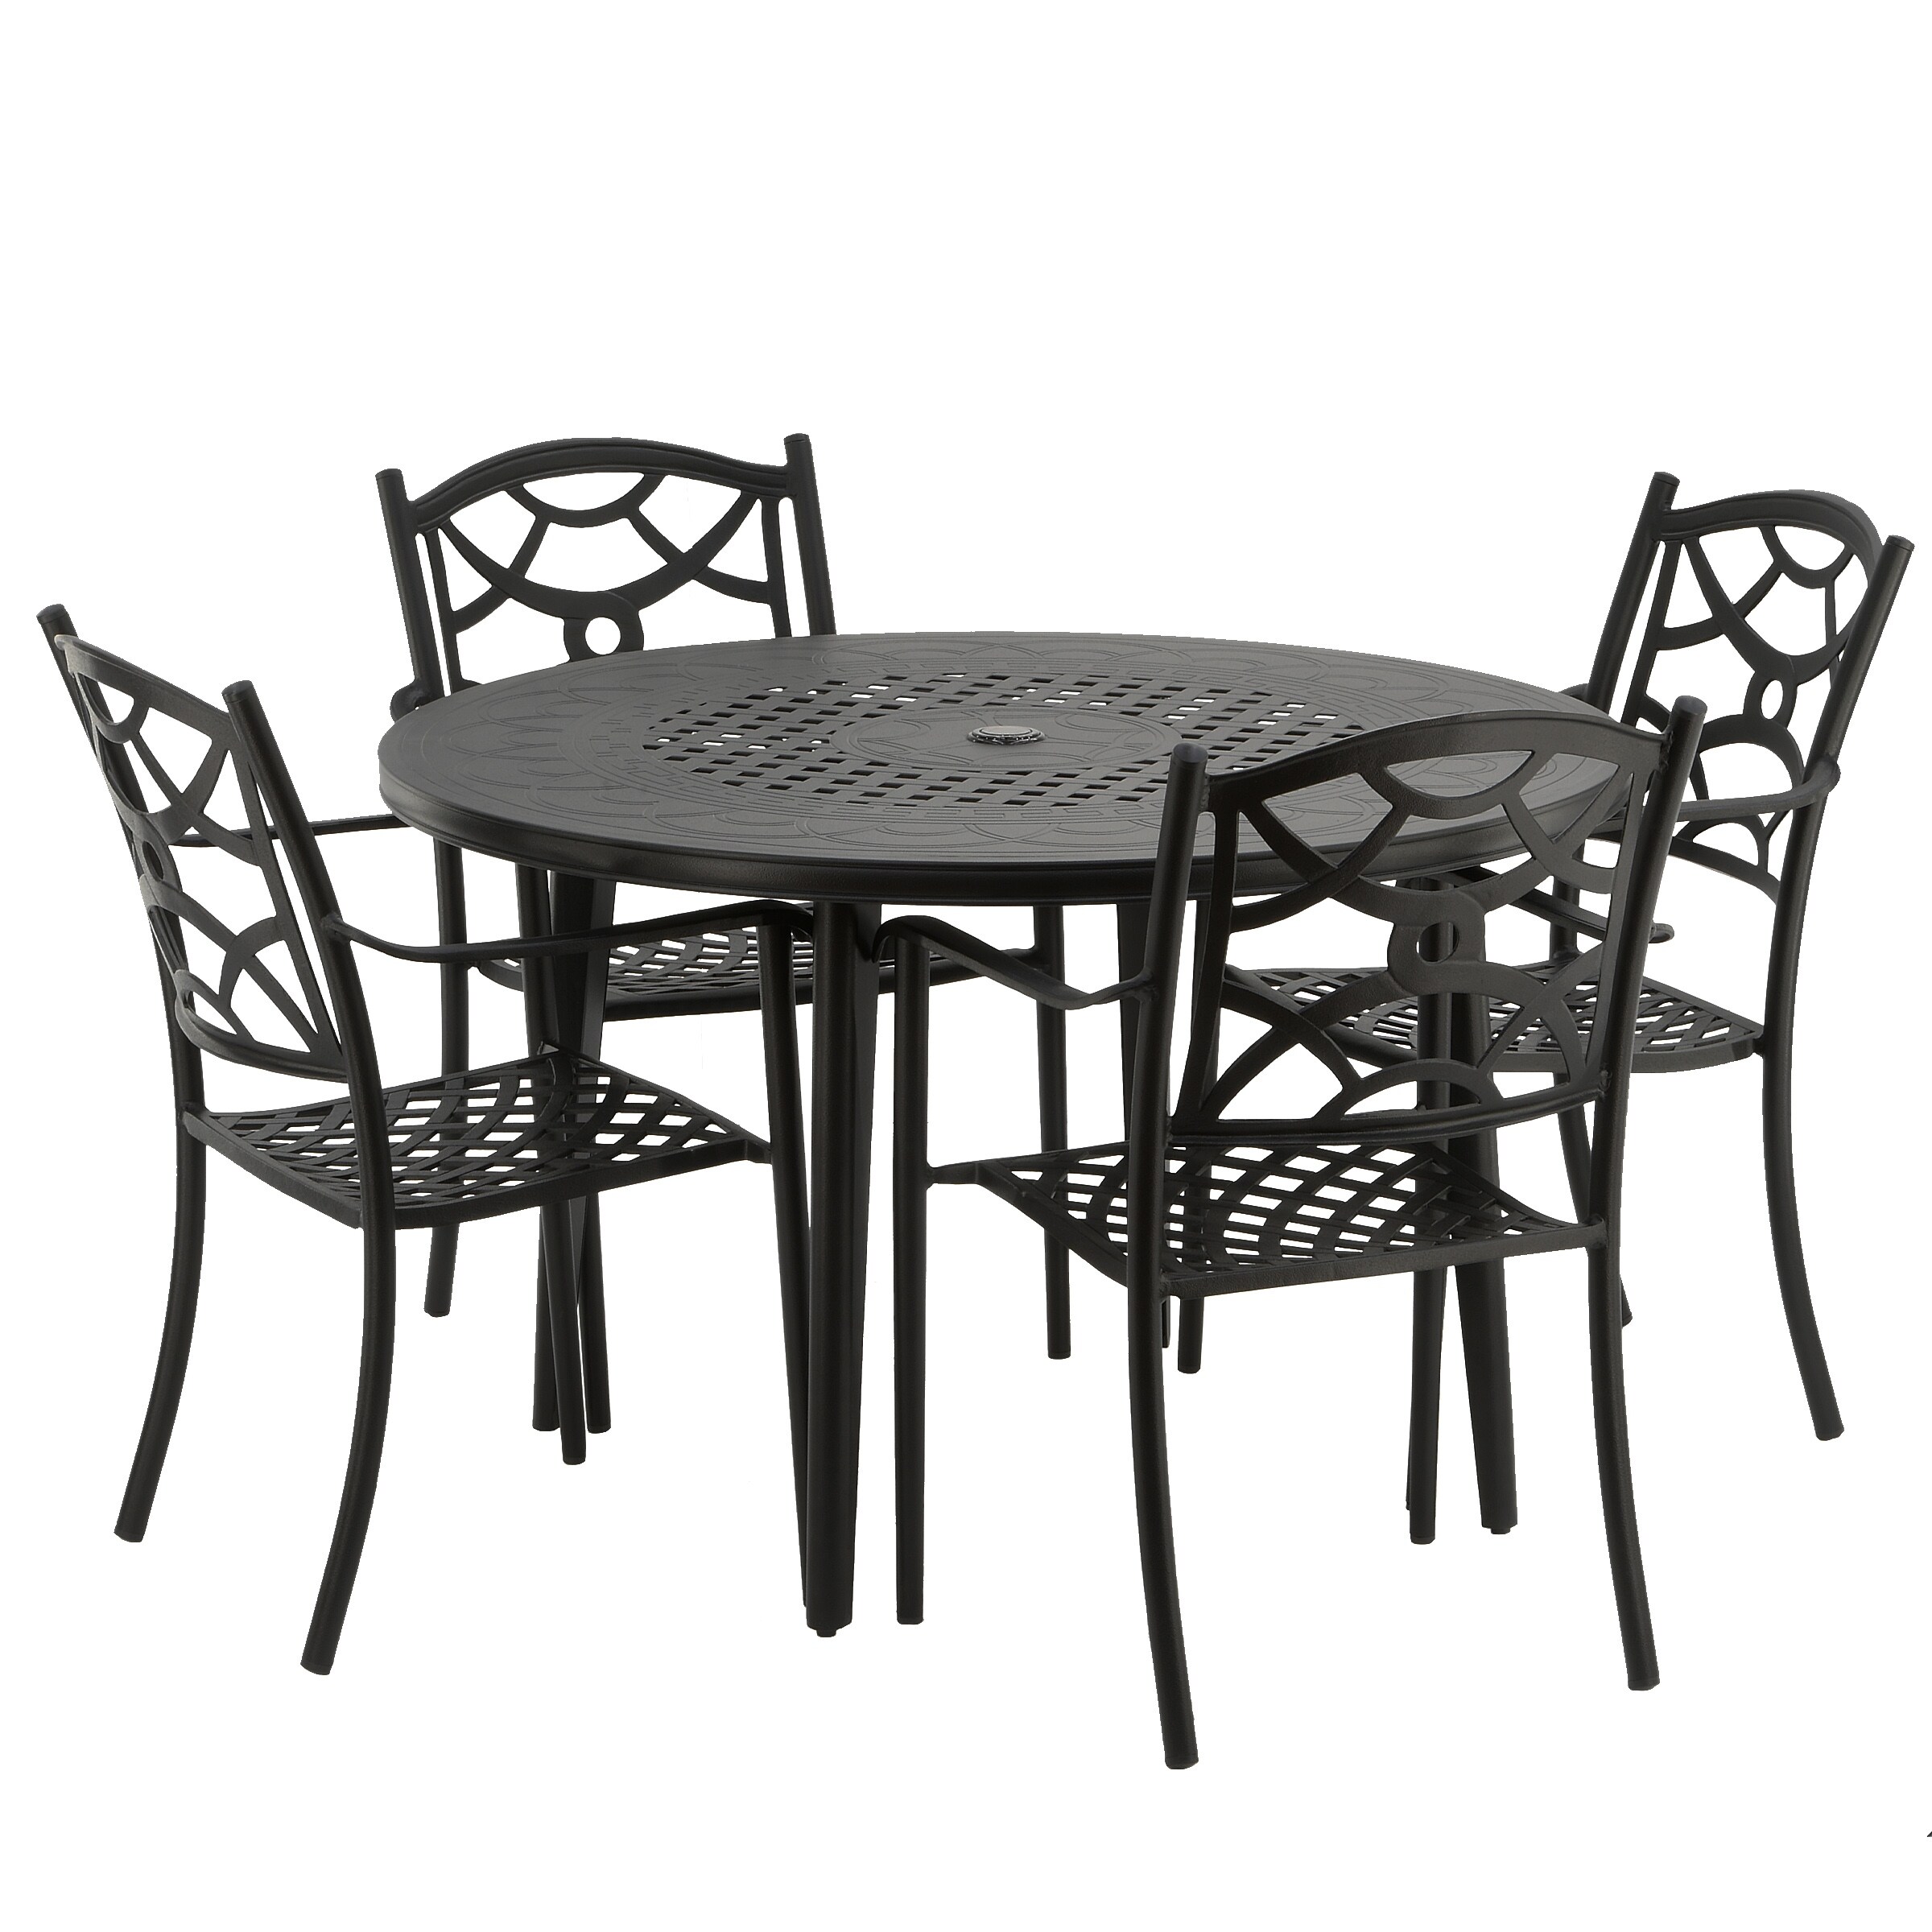 Darby Collection 5-piece All-weather Dining Set - 48 In